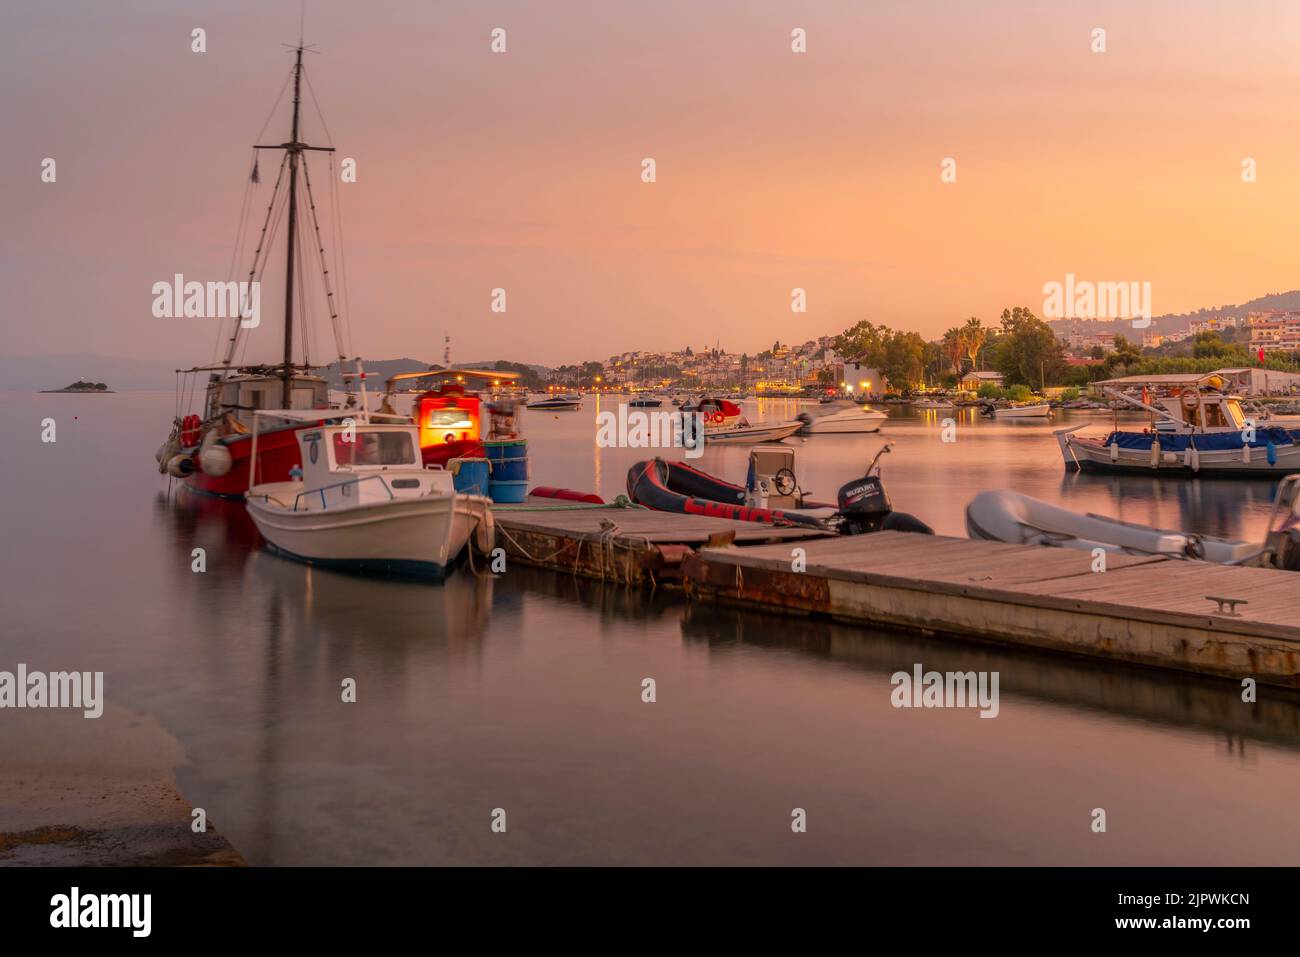 View of boats and Skiathos Town at sunset, Skiathos Island, Sporades Islands, Greek Islands, Greece, Europe Stock Photo